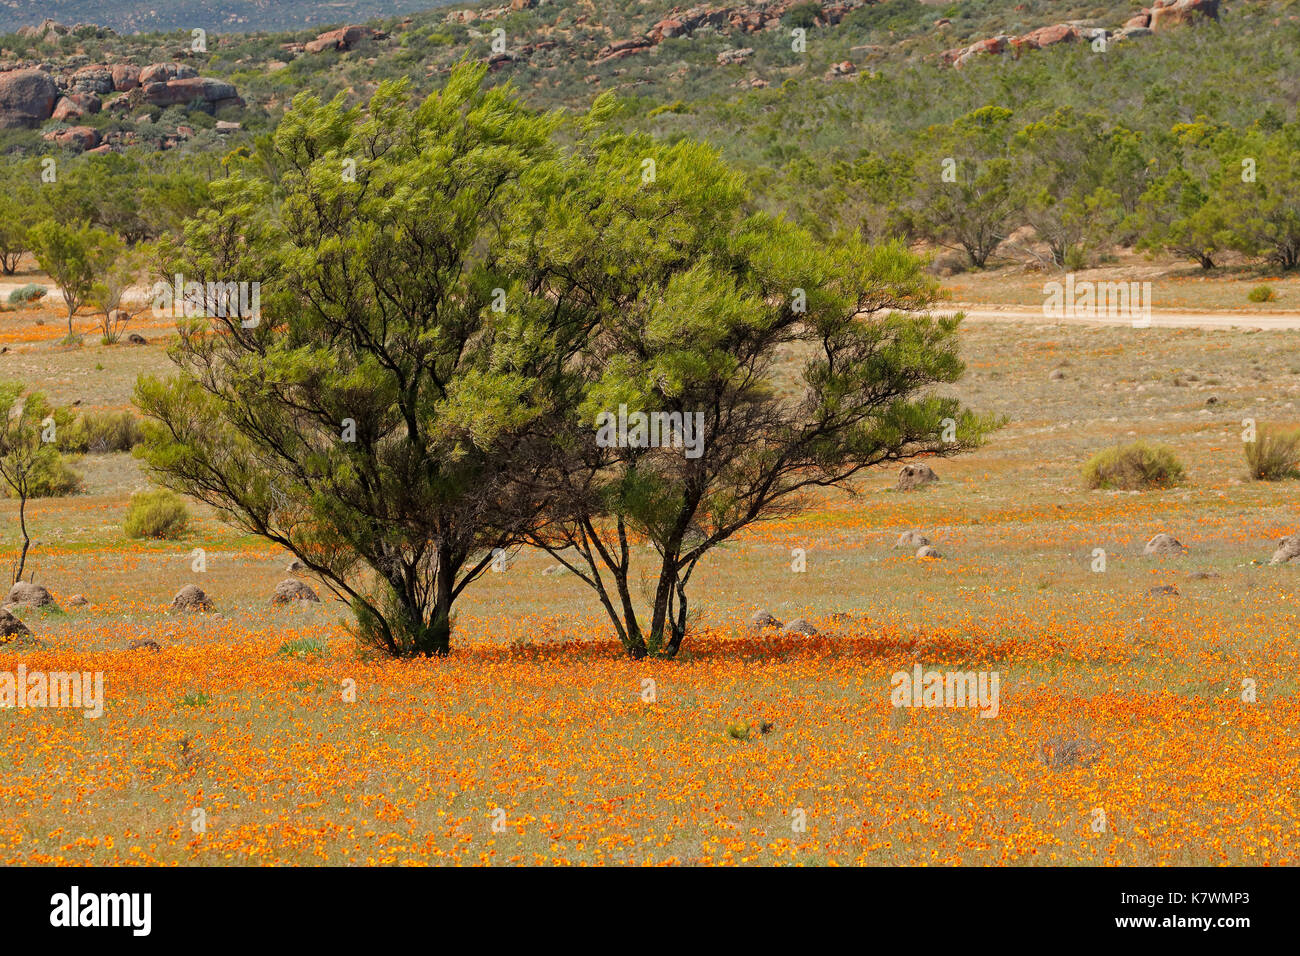 Landscape with colorful wild flowers and tree, Namaqua National Park, South Africa Stock Photo